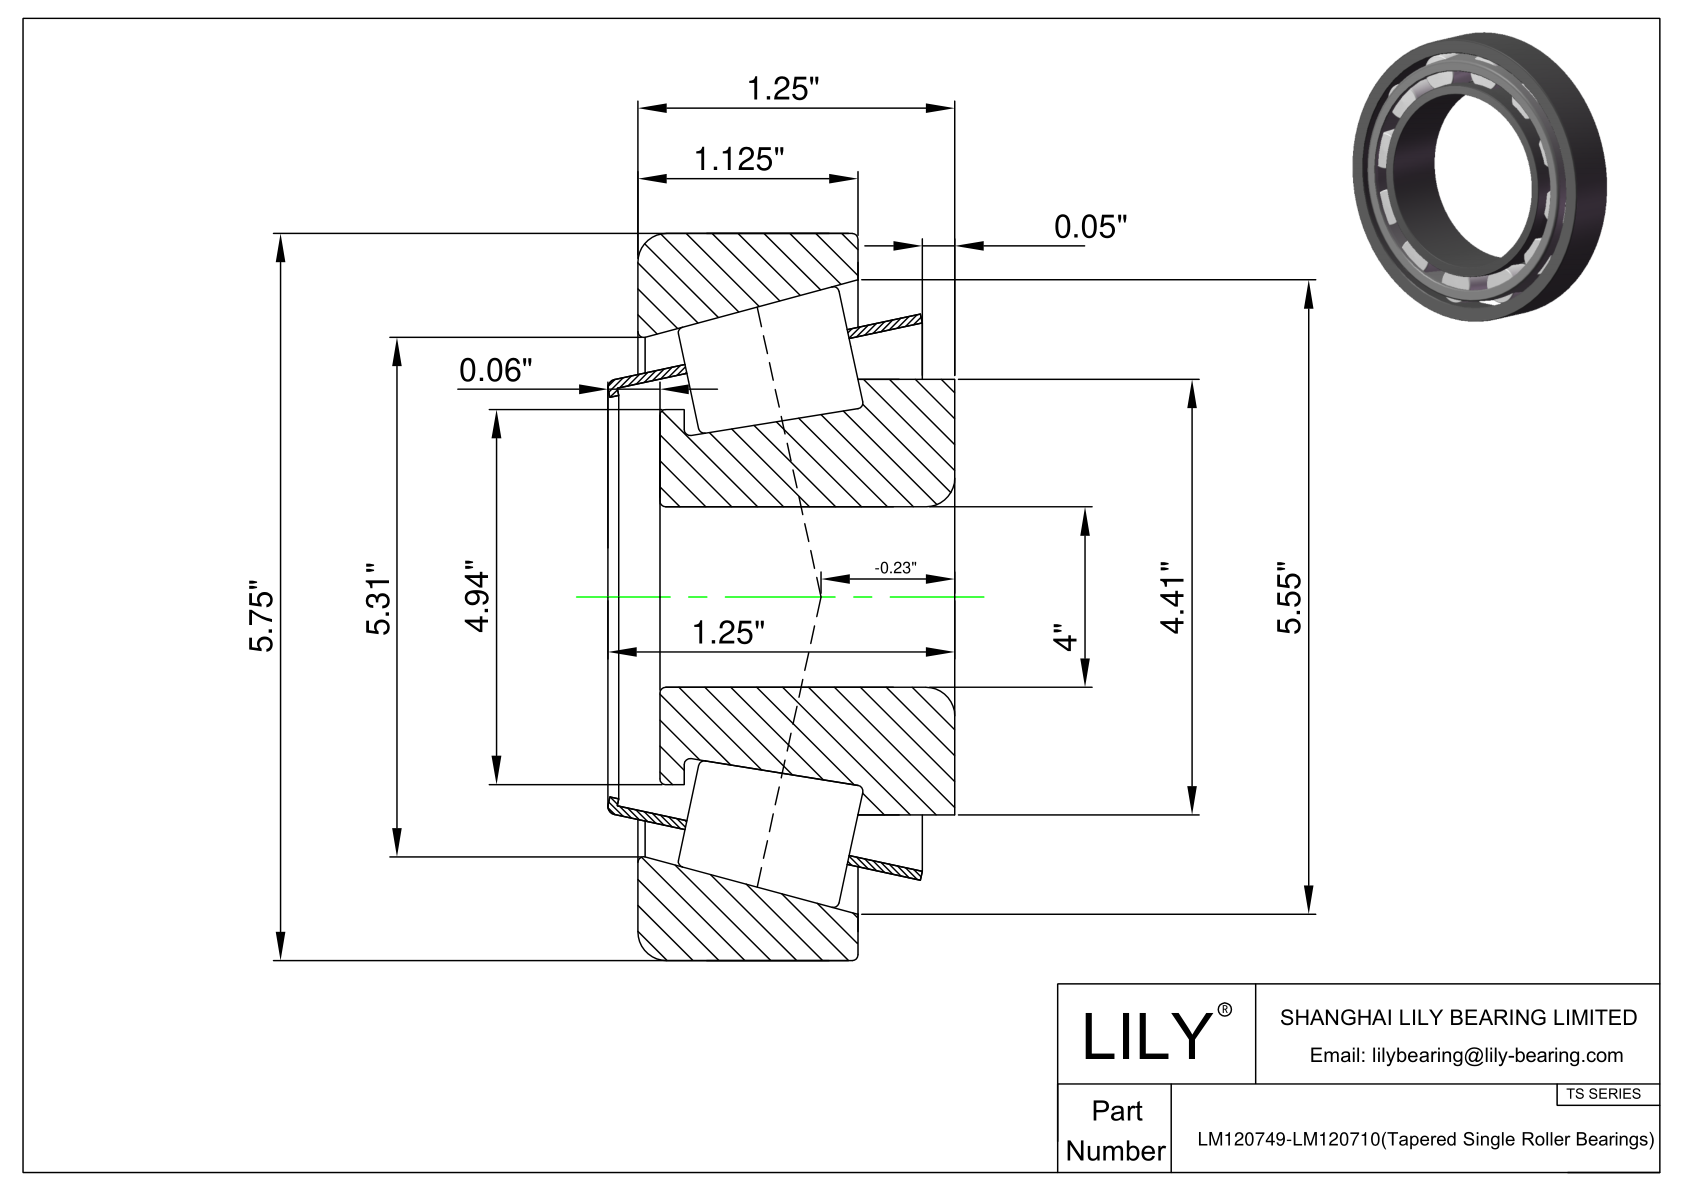 LM120749-LM120710 TS (Tapered Single Roller Bearings) (Imperial) cad drawing